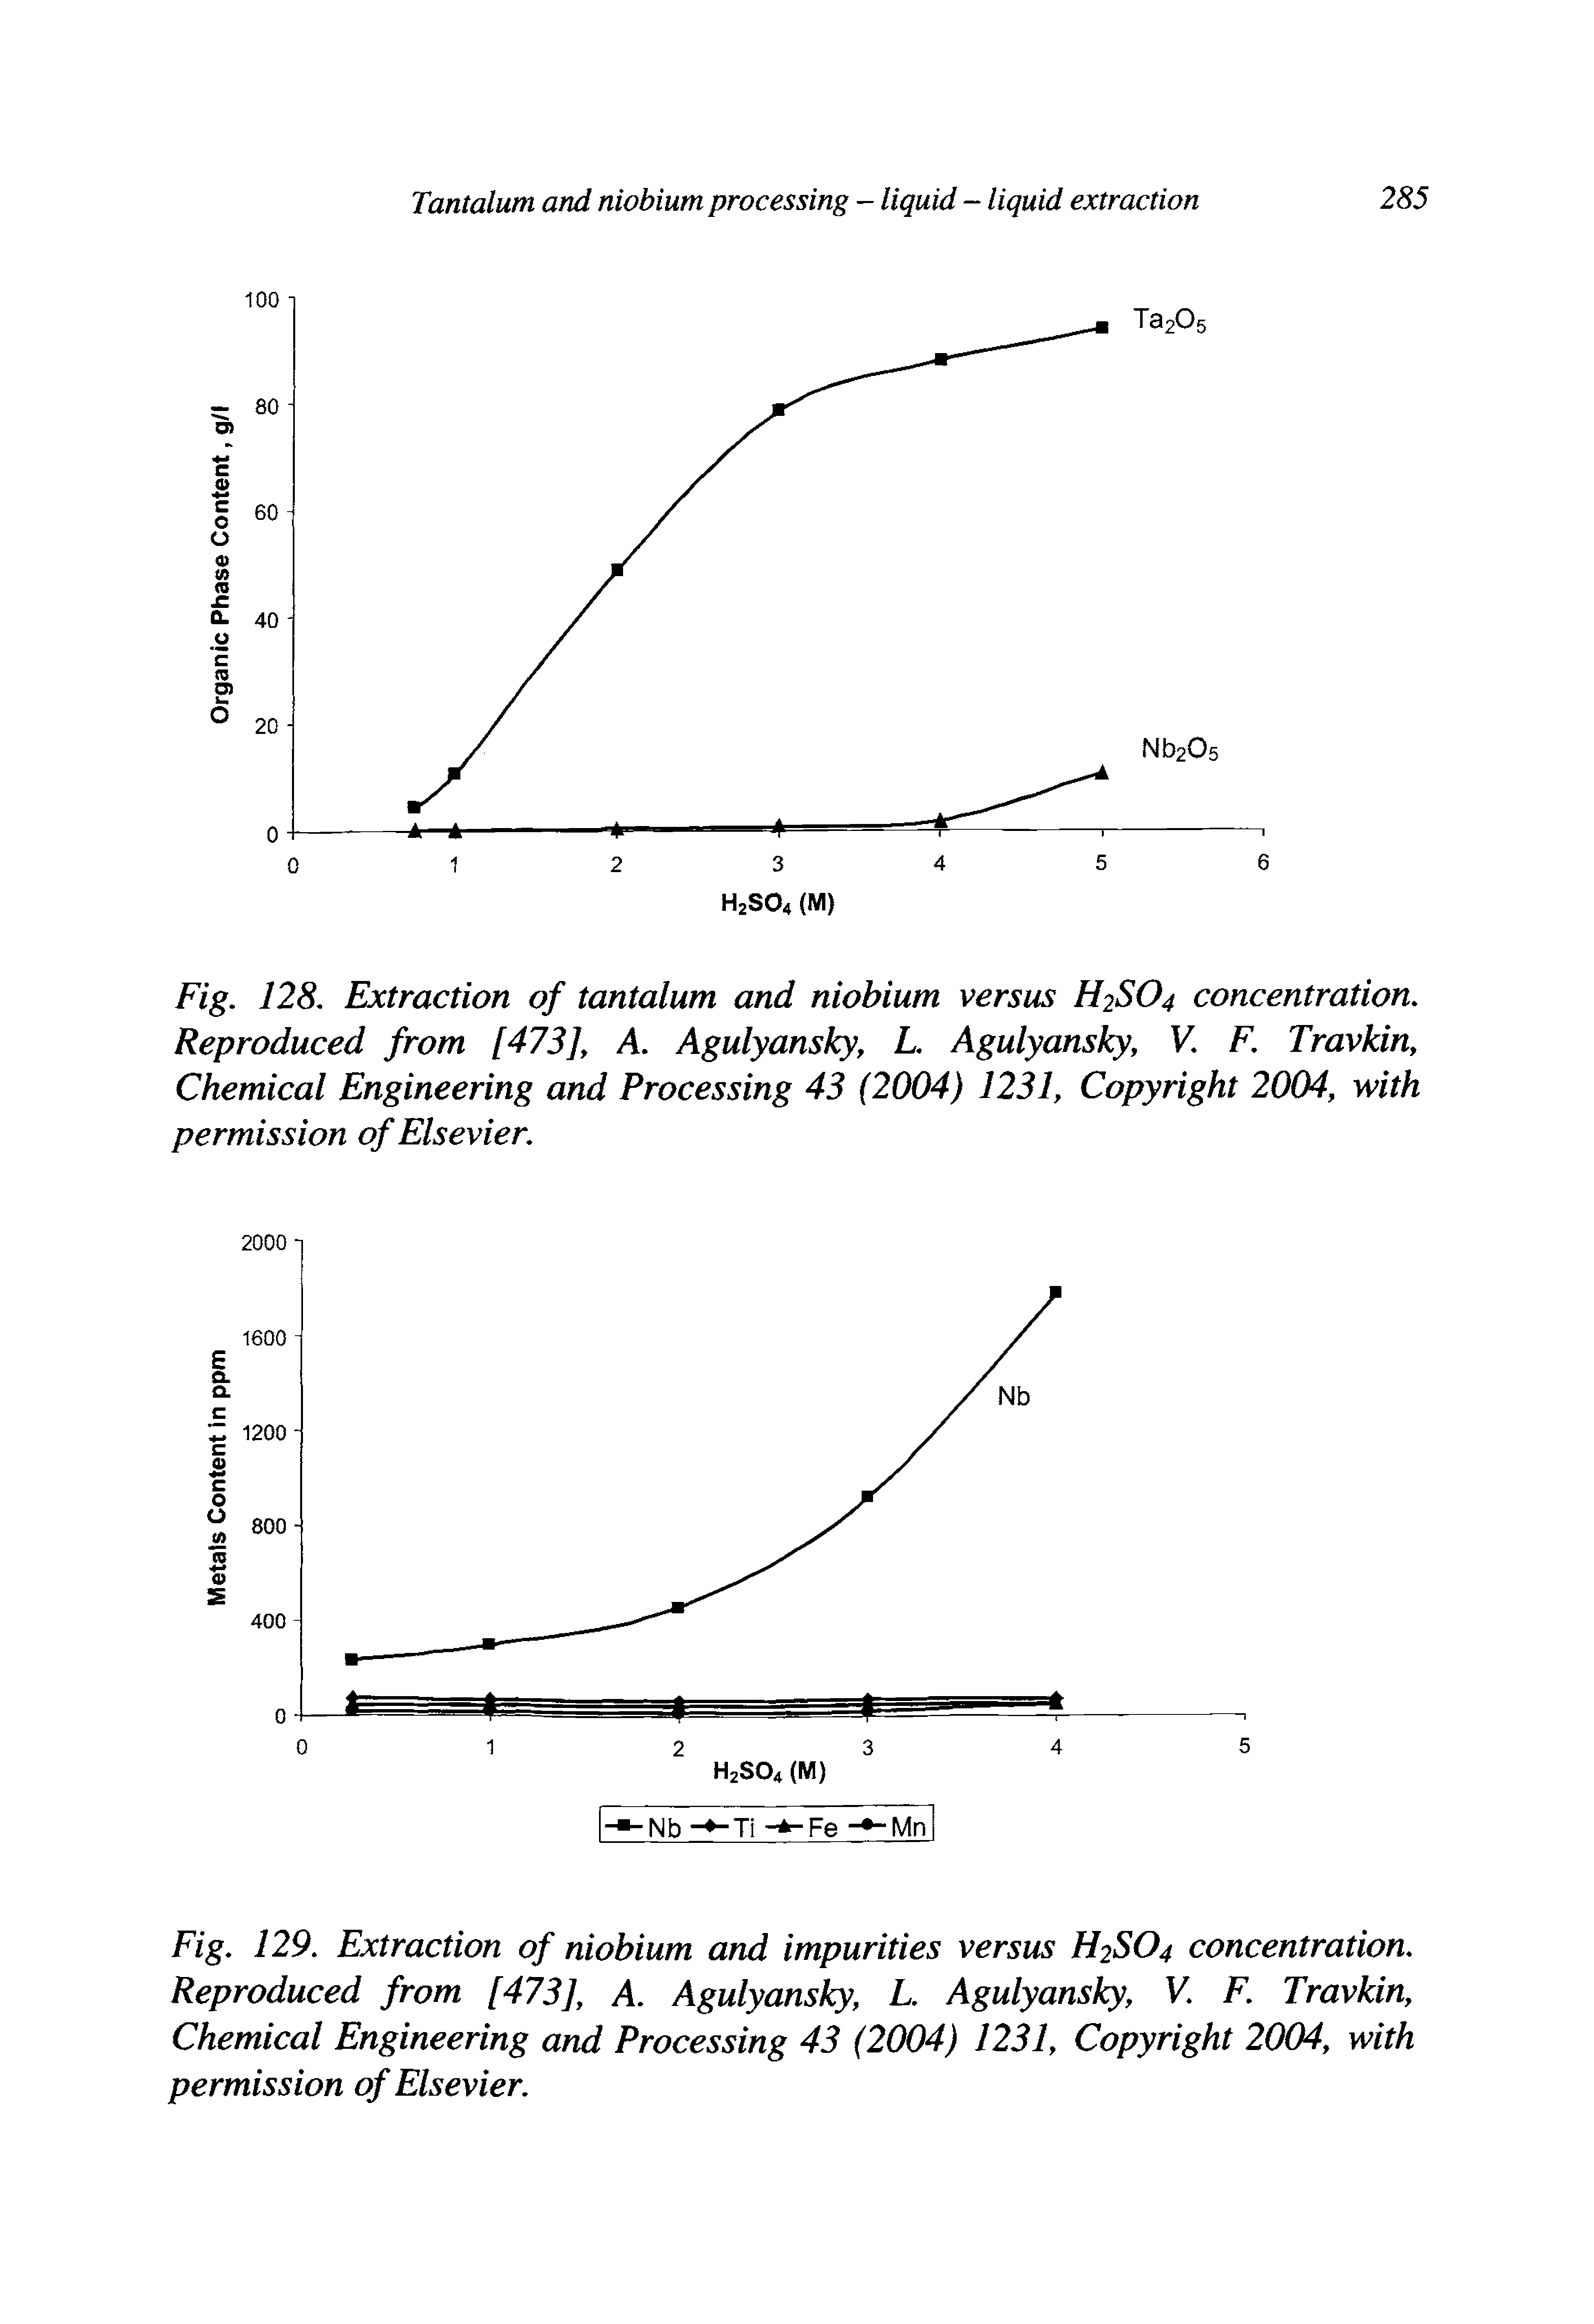 Fig. 128. Extraction of tantalum and niobium versus H2SO4 concentration. Reproduced from [473], A. Agulyansky, L. Agulyansky, V. F. Travkin, Chemical Engineering and Processing 43 (2004) 1231, Copyright 2004, with permission of Elsevier.